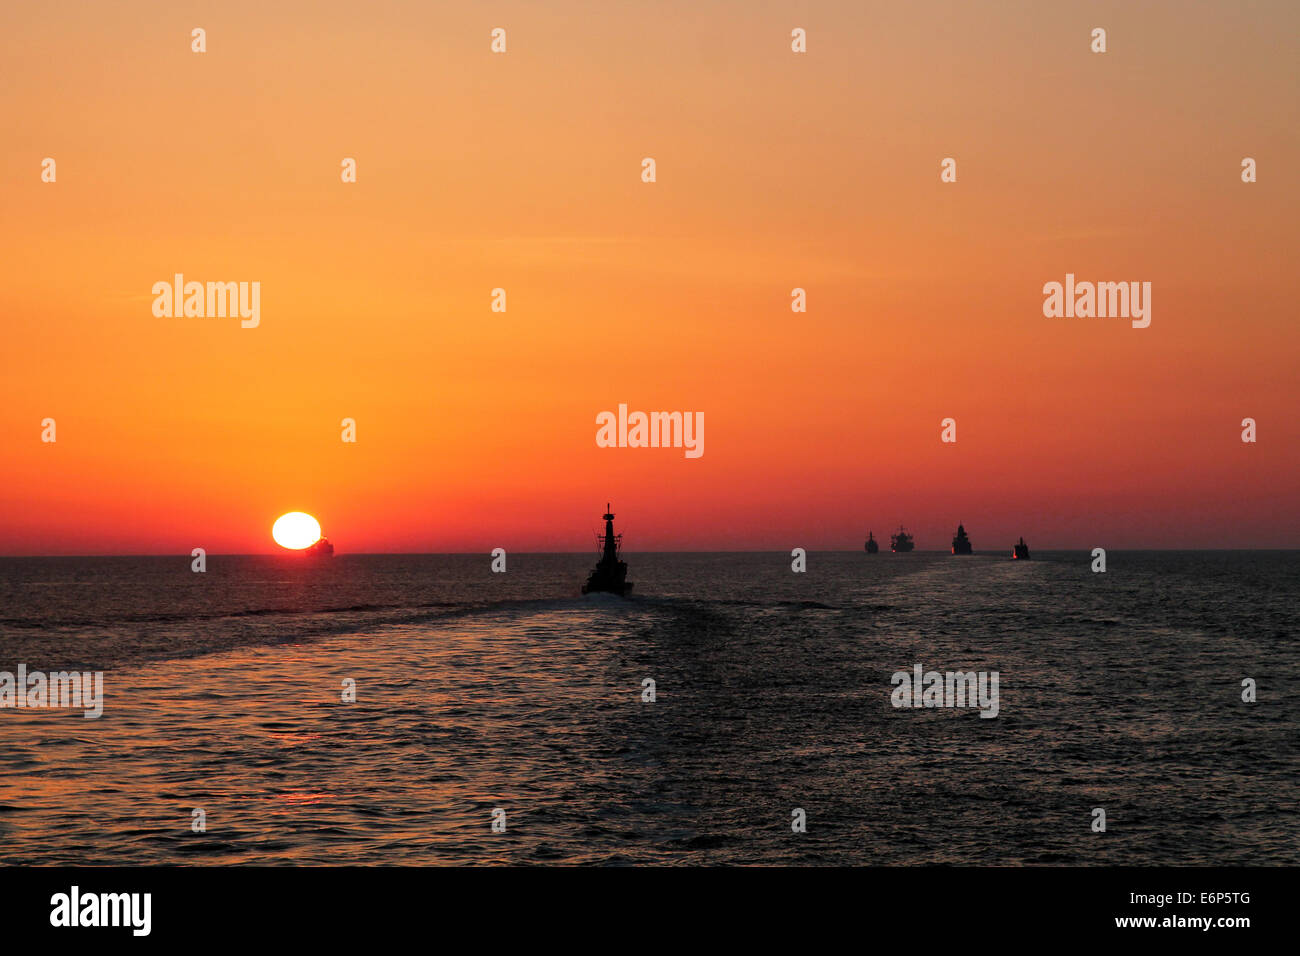 Ships in BALTOPS 2014 naval exercise at sunset in the middle of Baltic Sea, june 2014. Stock Photo